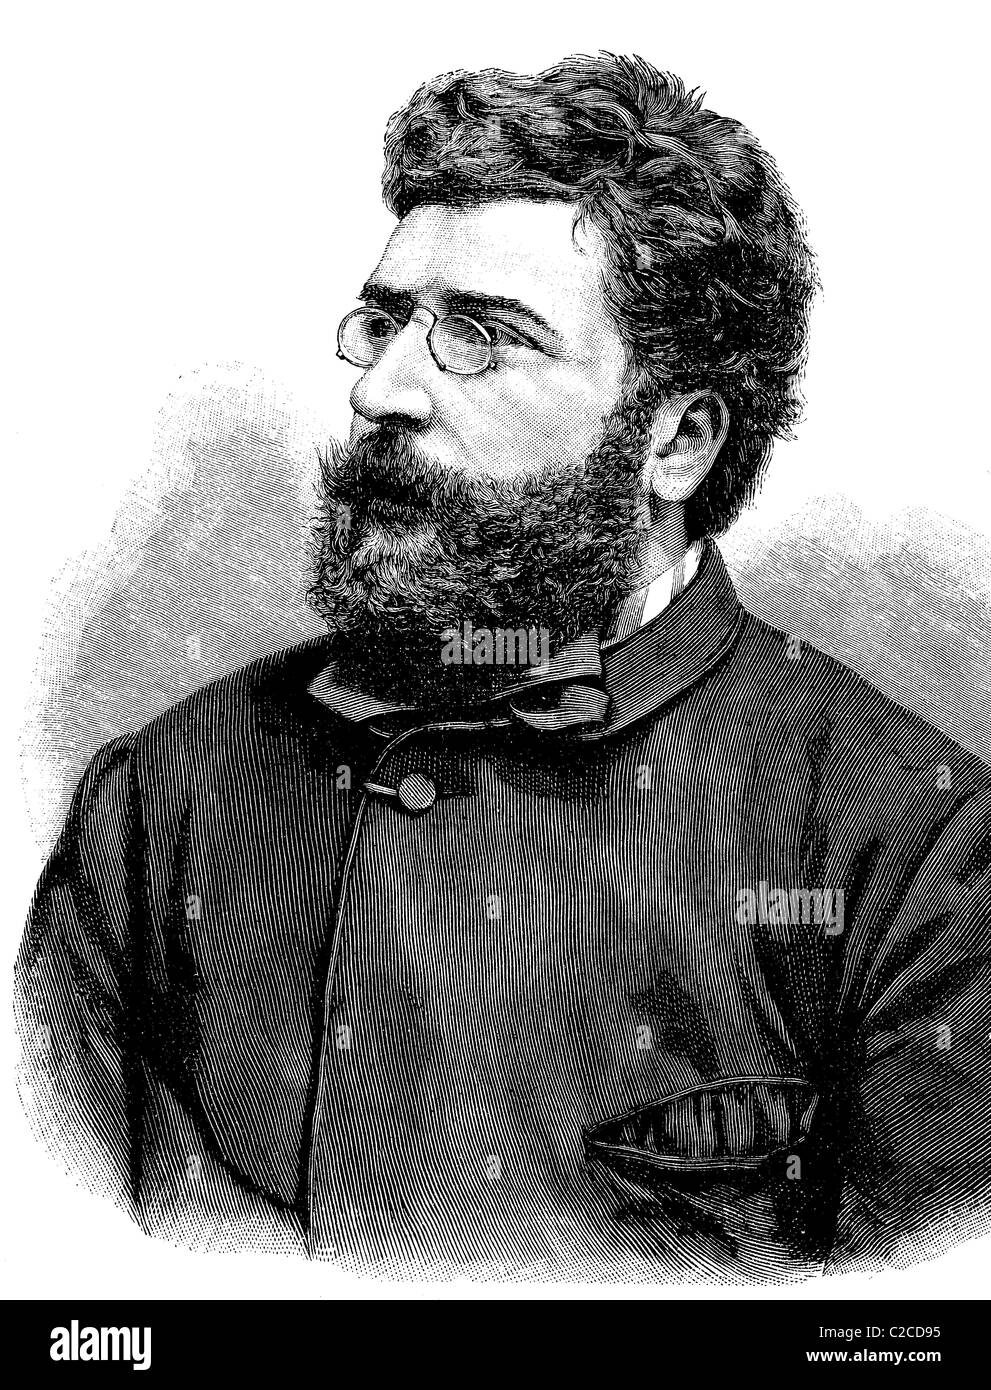 Georges Bizet, 1838 - 1875, French composer, historical illustration circa 1893 Stock Photo